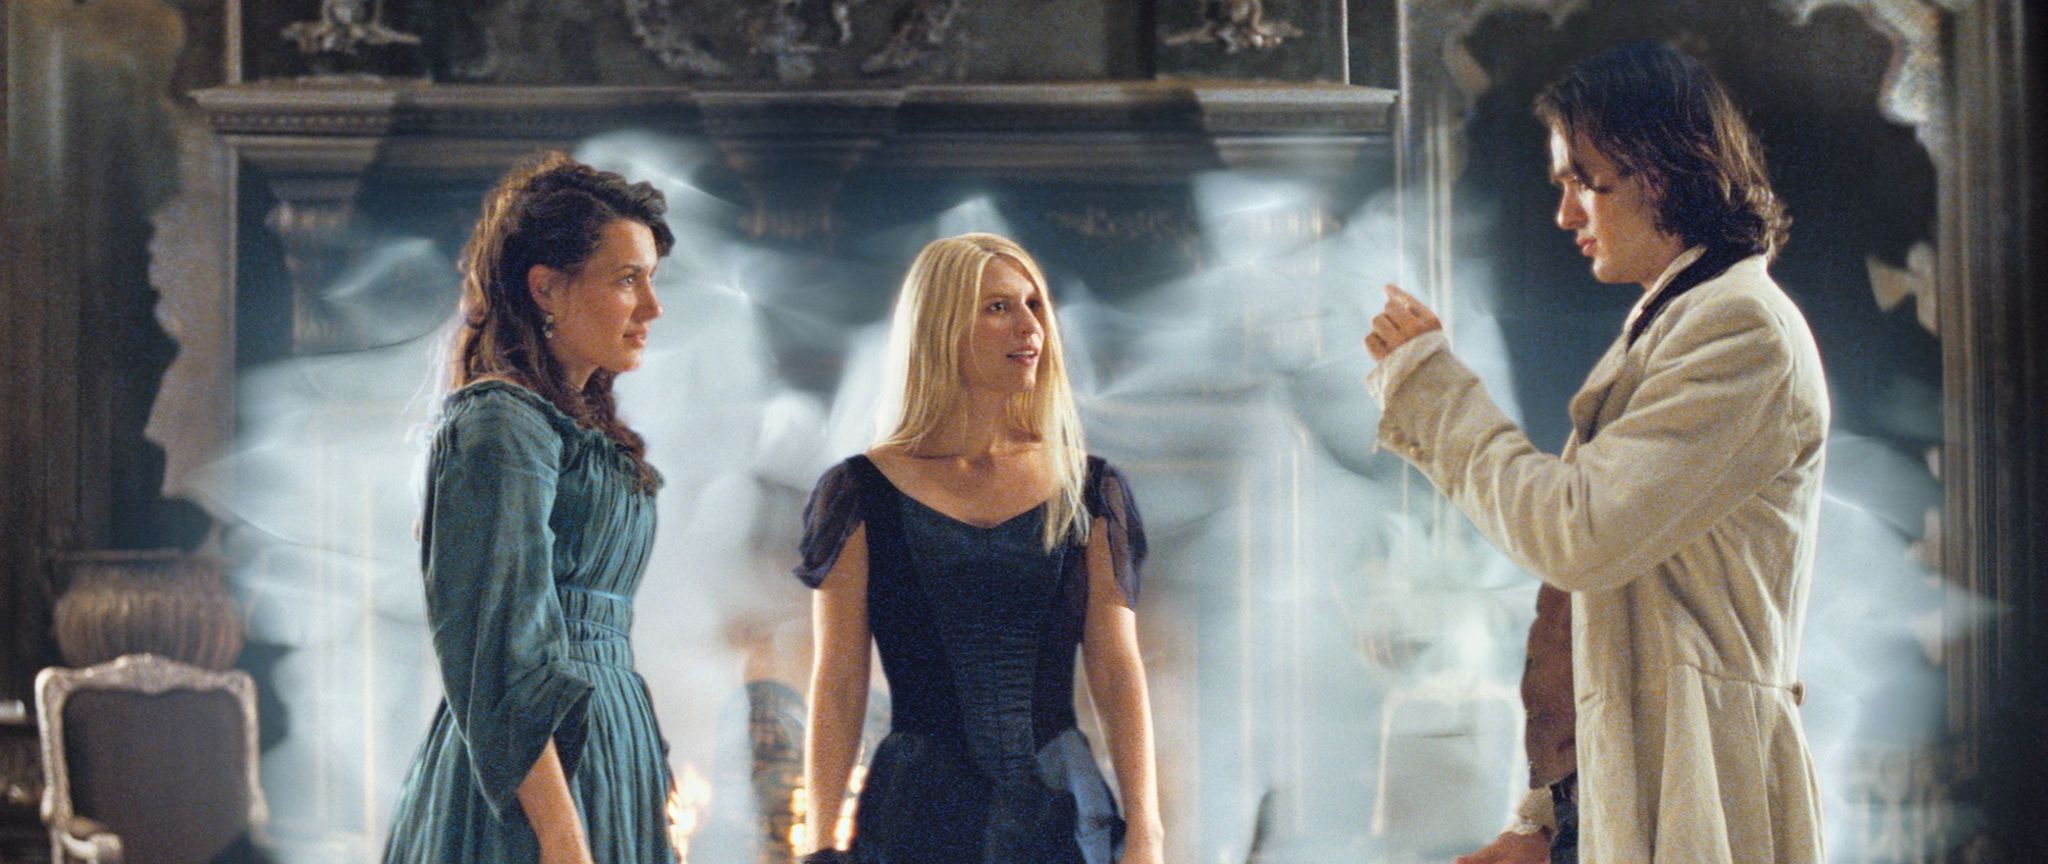 Still of Claire Danes, Kate Magowan and Charlie Cox in Zvaigzdziu dulkes (2007)